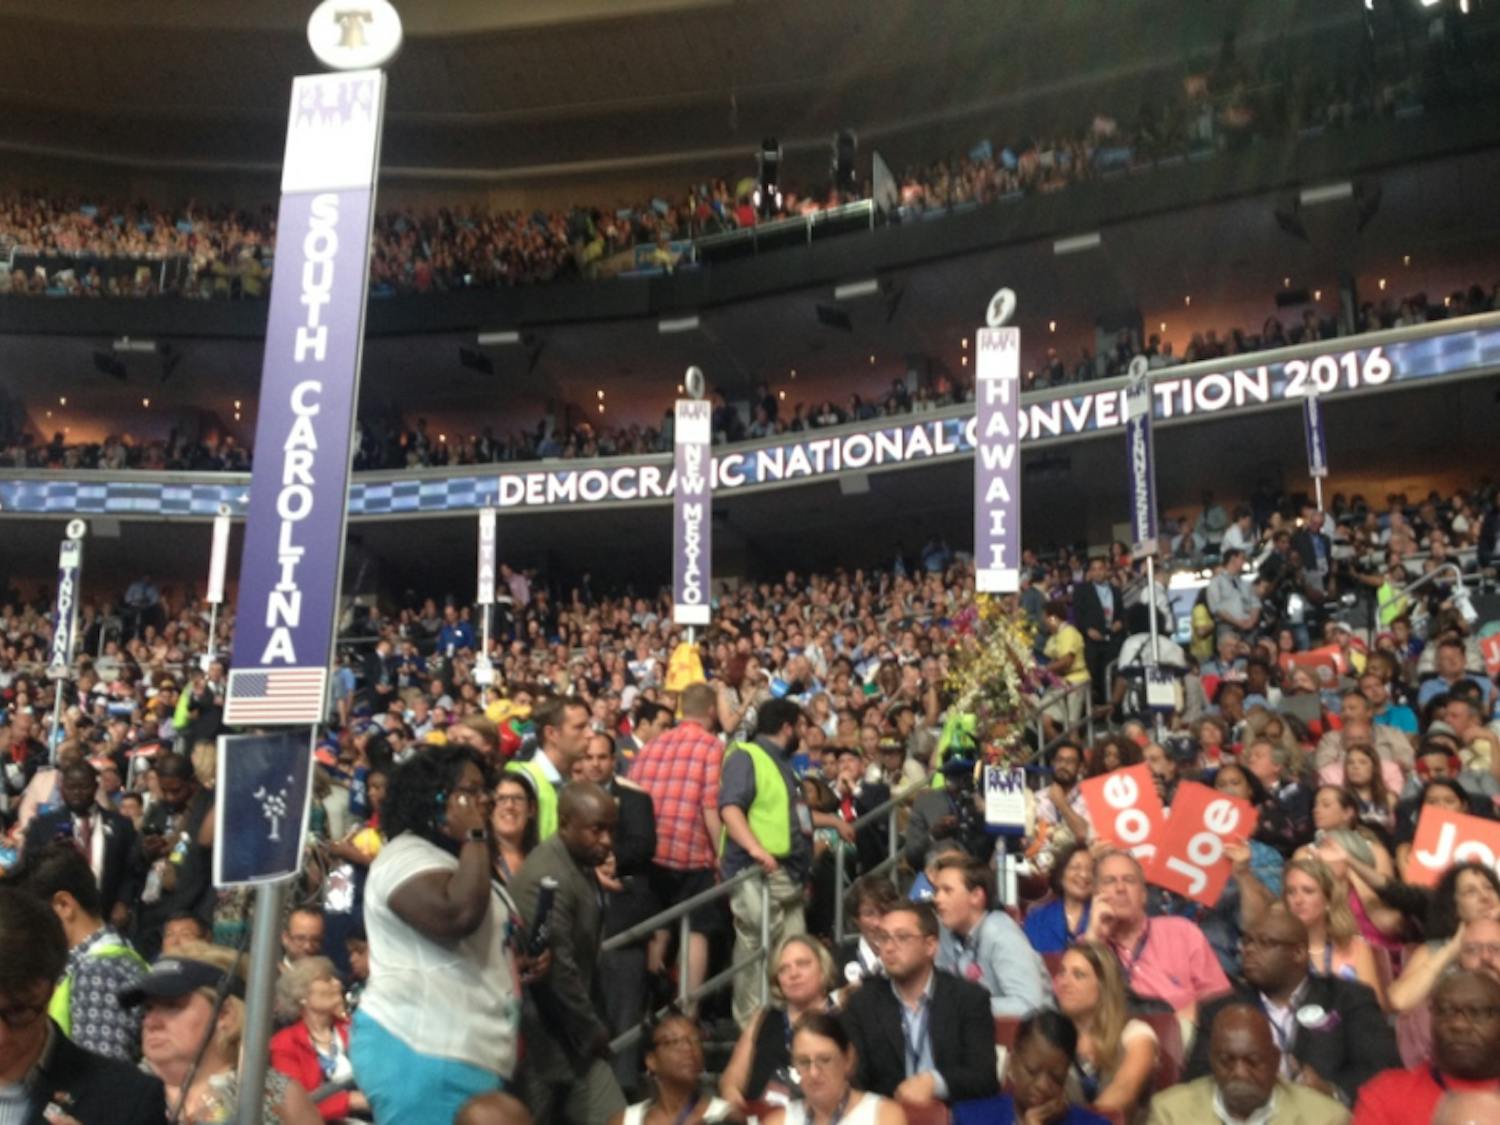 The South Carolina delegation eagerly awaits remarks from Vice President Joe Biden at the Democratic National Convention in Philadelphia on July 27, 2016.